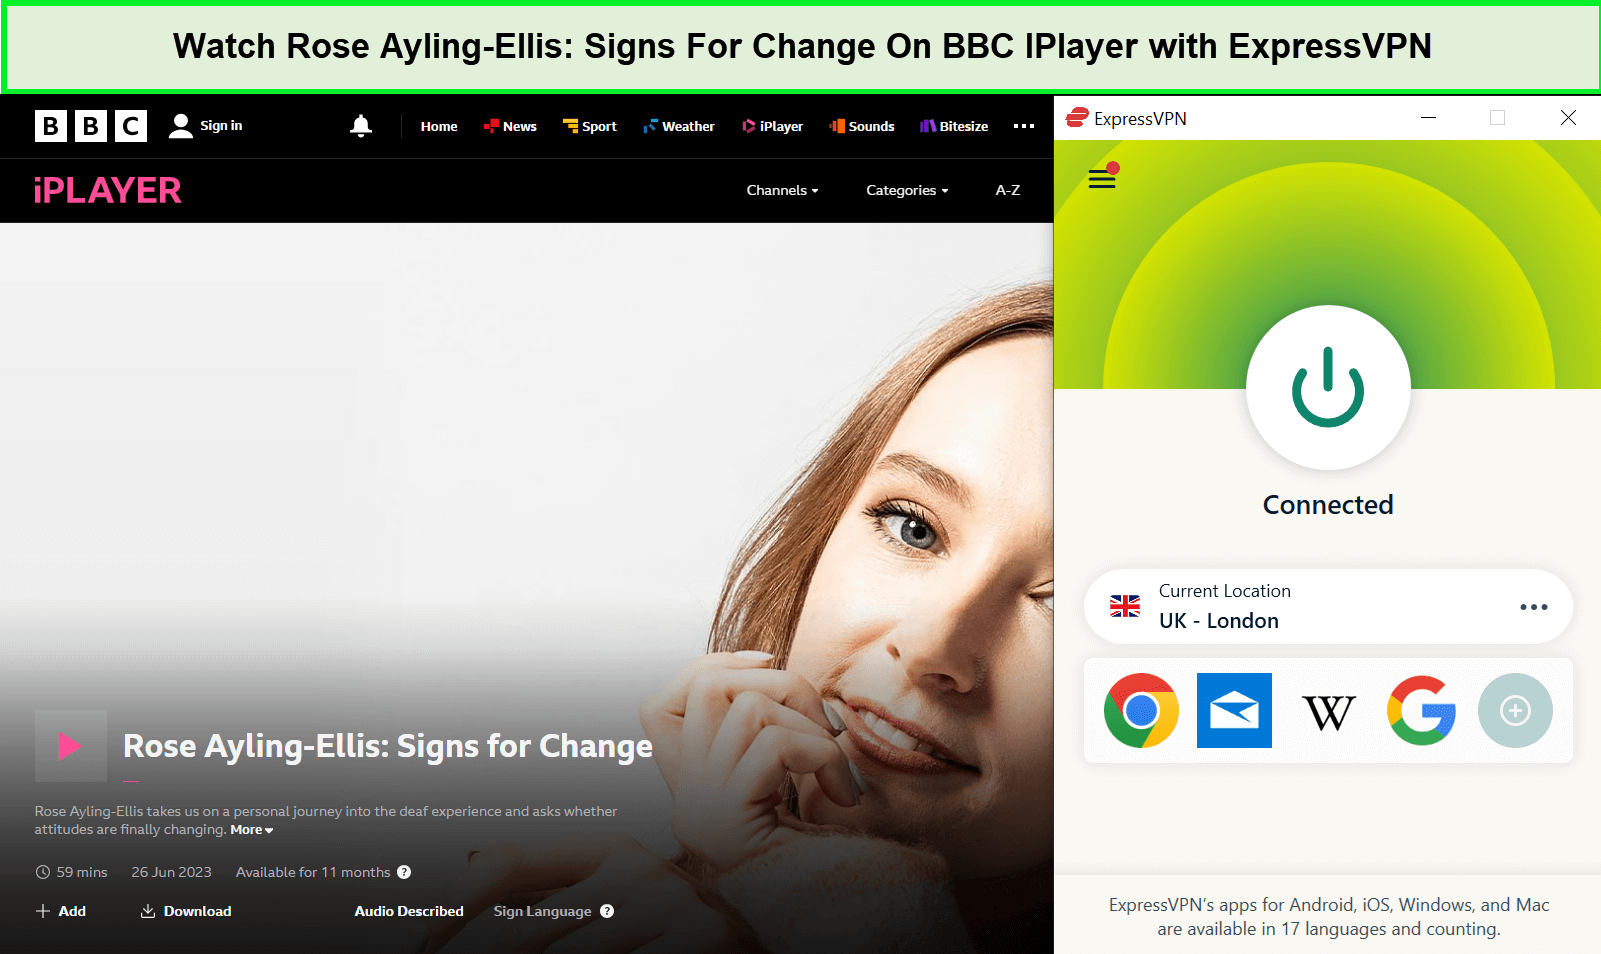 Watch-Rose-Ayling-Ellis-Signs-For-Change-in-USA-On-BBC-IPlayer-with-ExpressVPN